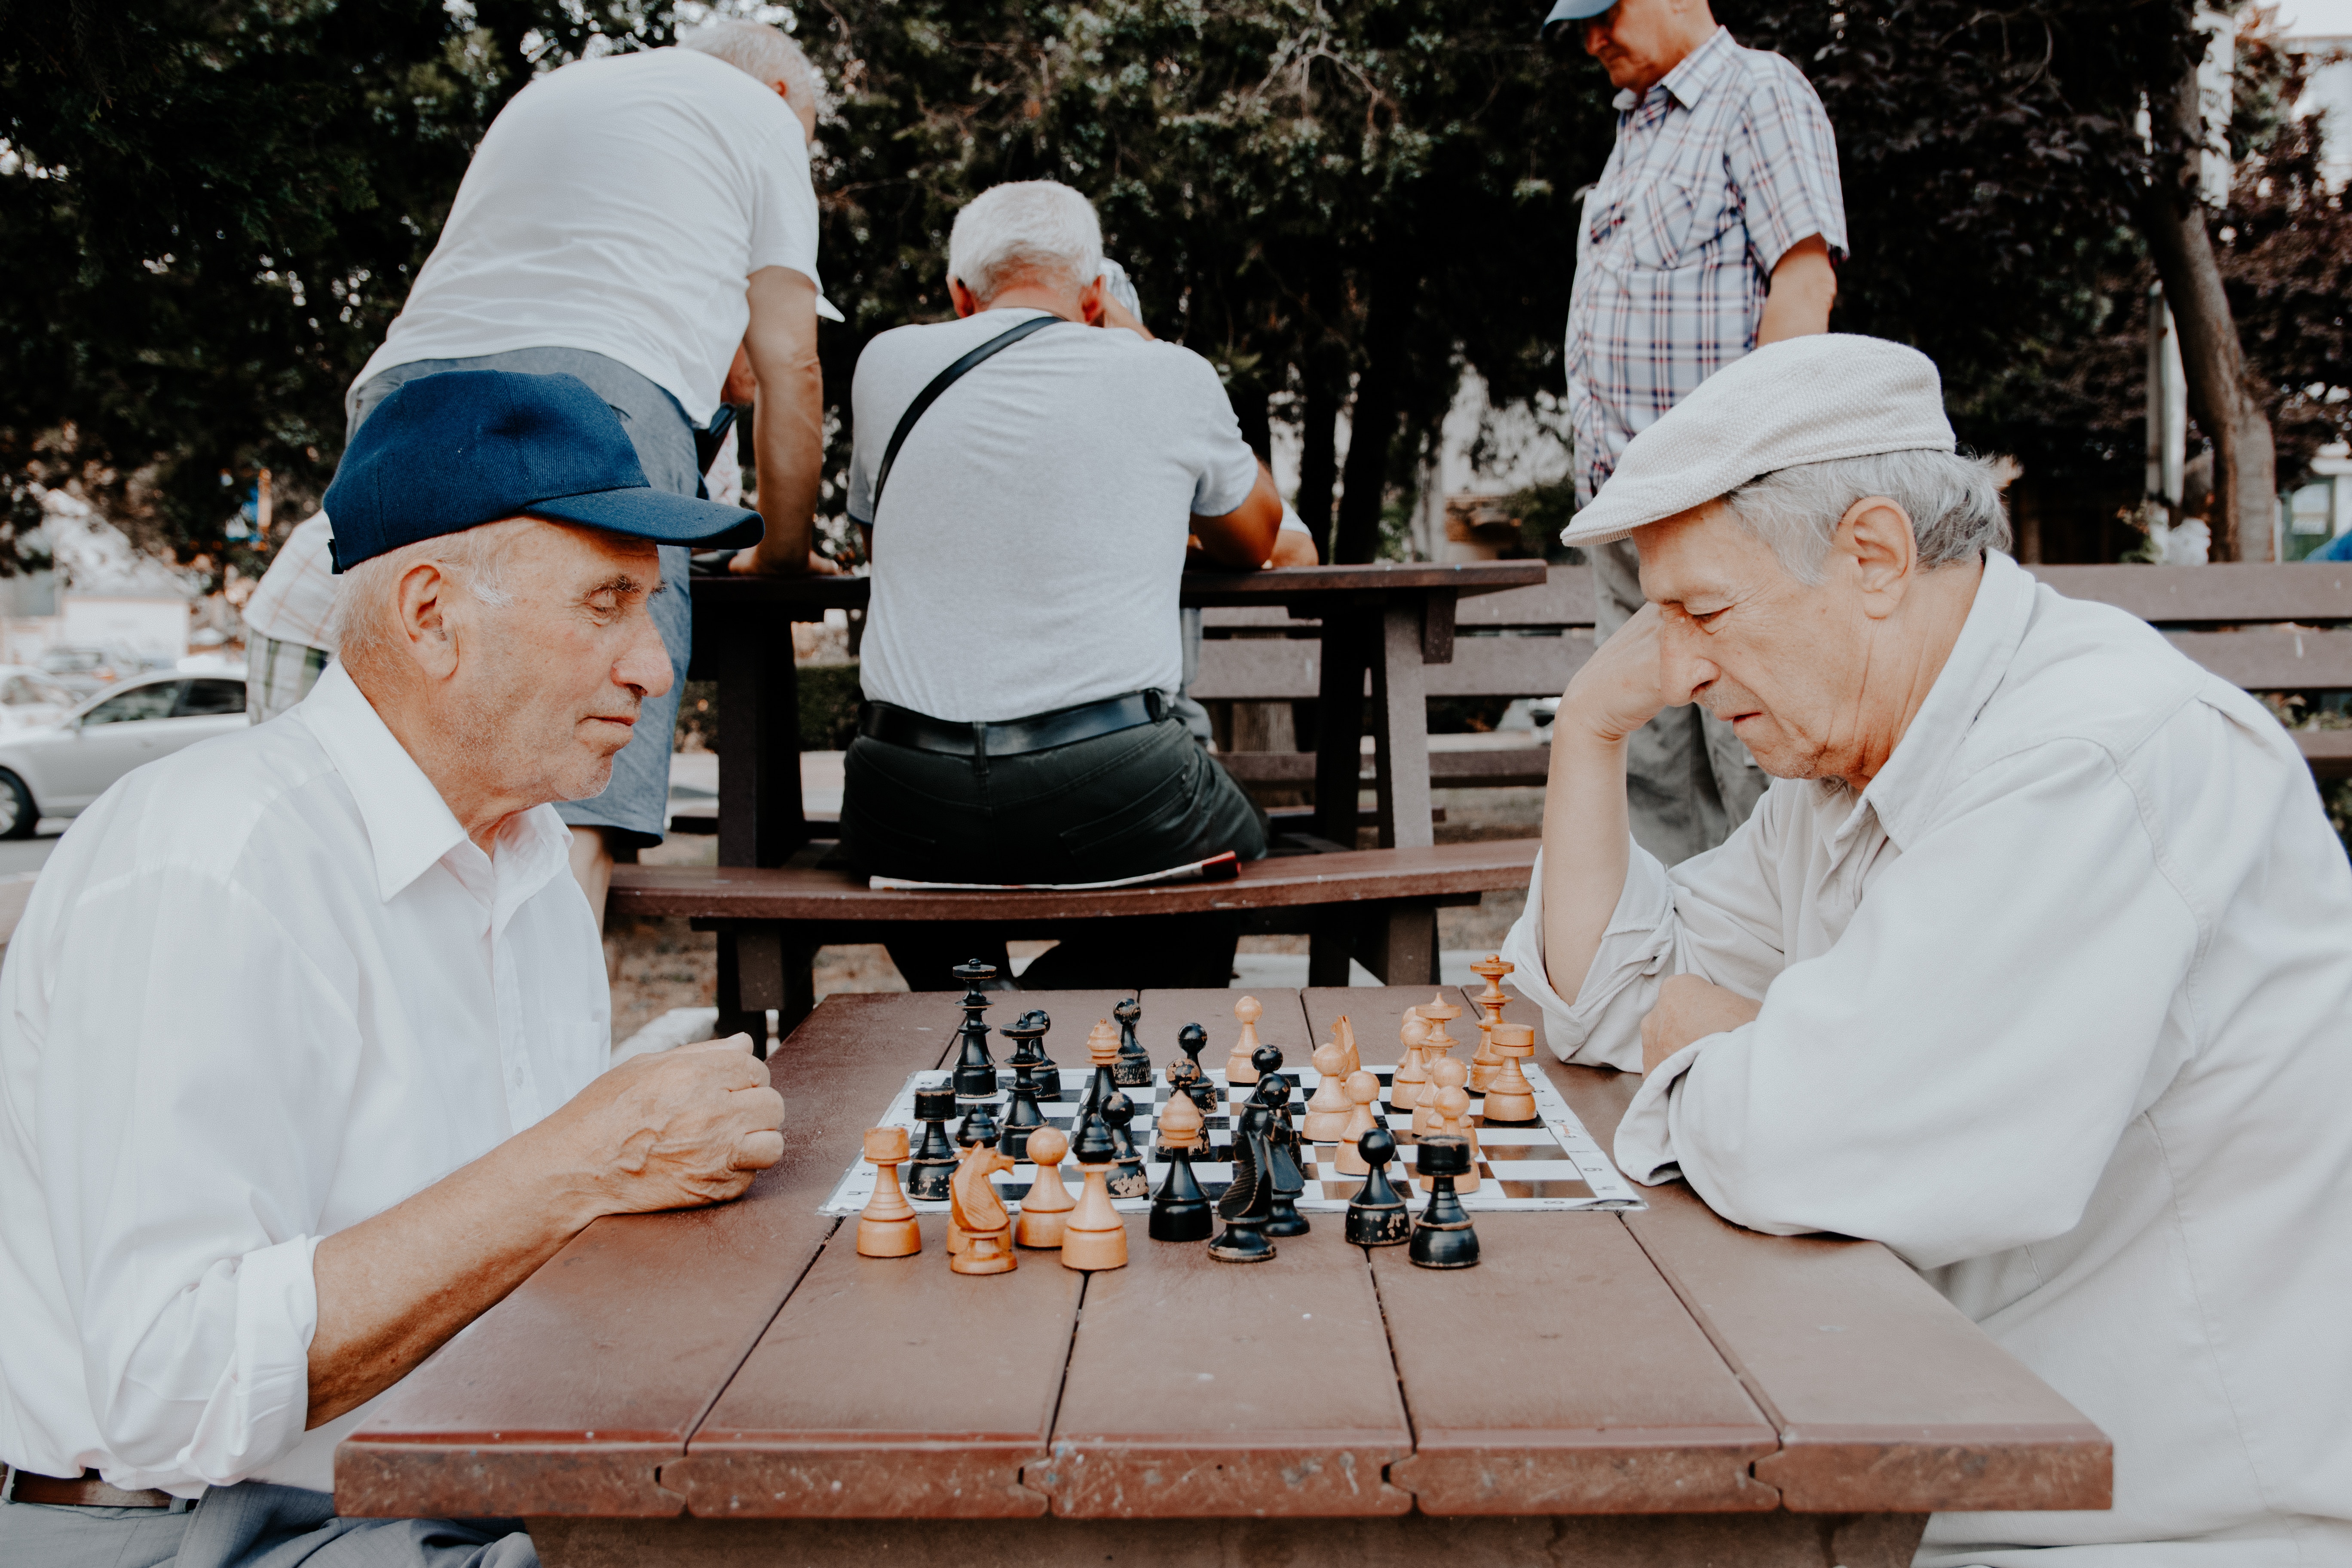 Two older men sit across from one another at a picnic table outside and are playing chess.